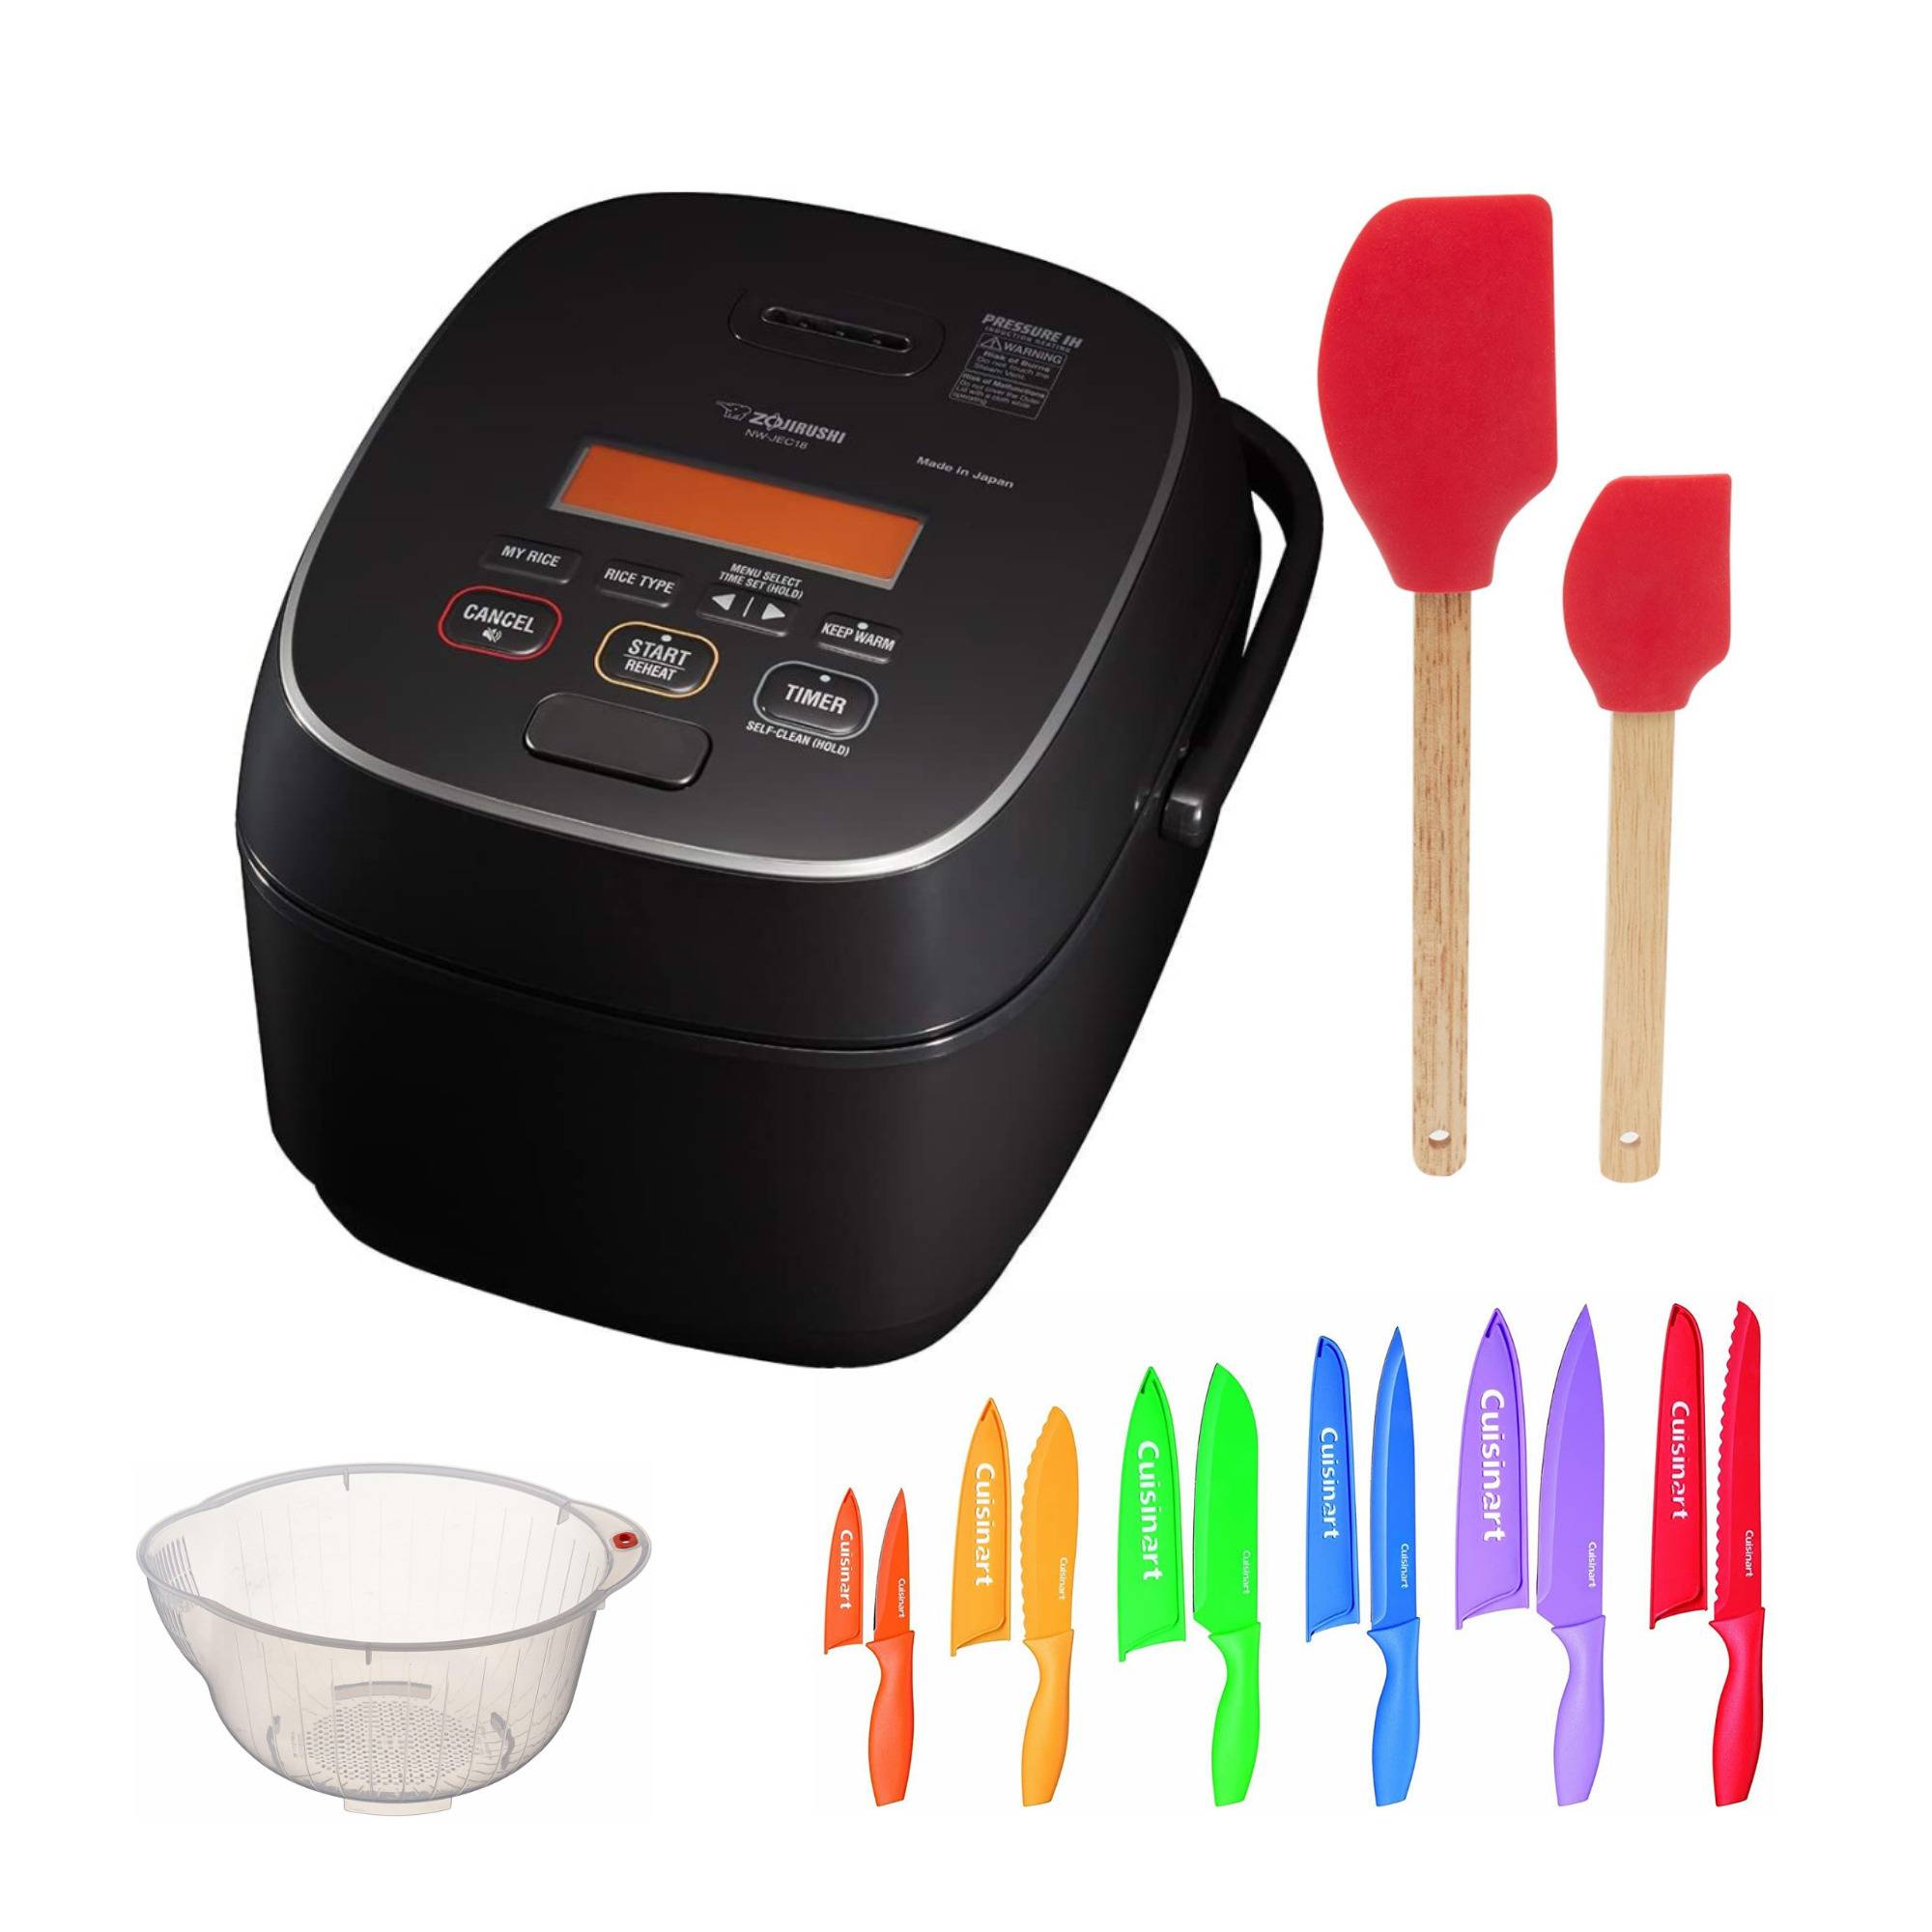 Zojirushi NW-JEC18BA Pressure Induction Heating Rice Cooker with Rice Washing Bowl, and Accessory